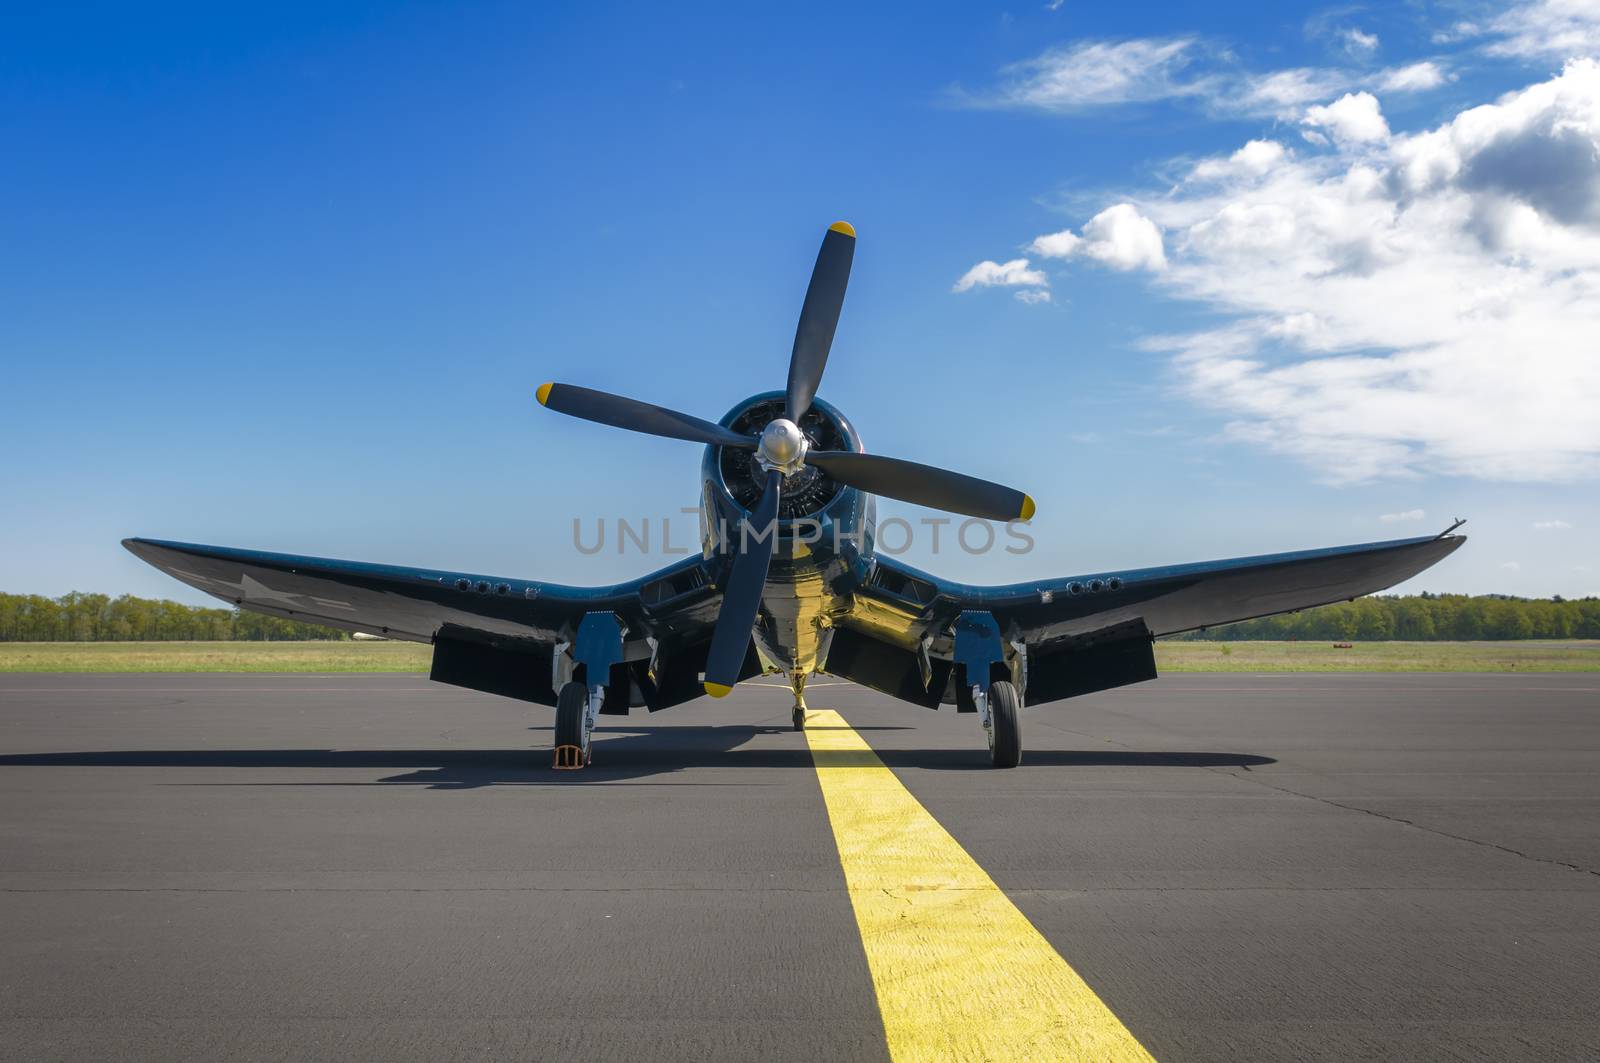 Chance Vought F4U Corsair on static display, front view from below. American WWII fighter plane, classic warbird, nickname whistling death